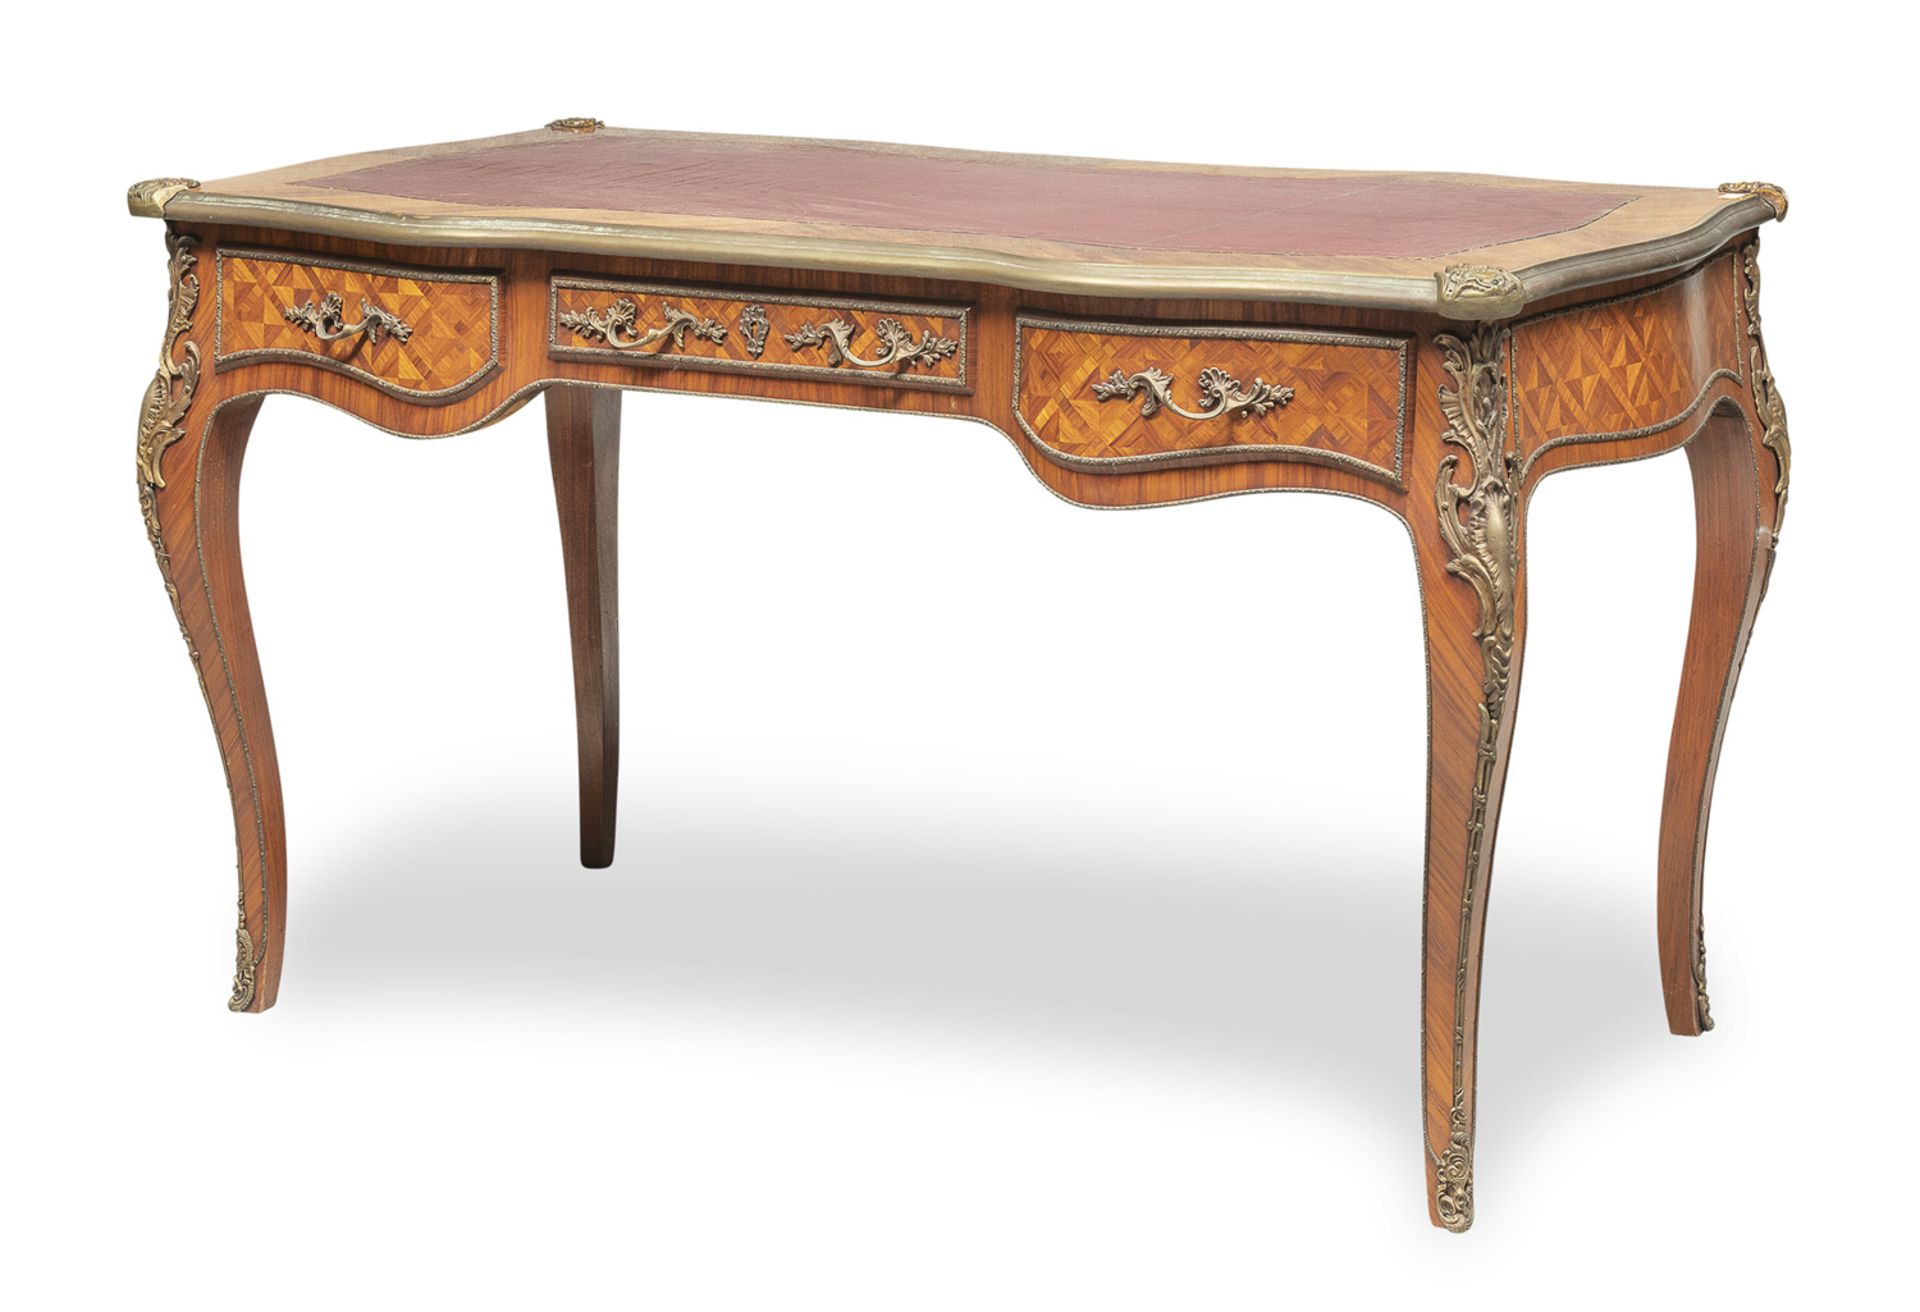 DESK IN BOIS DE ROSE FRENCH TRANSITION STYLE 20TH CENTURY